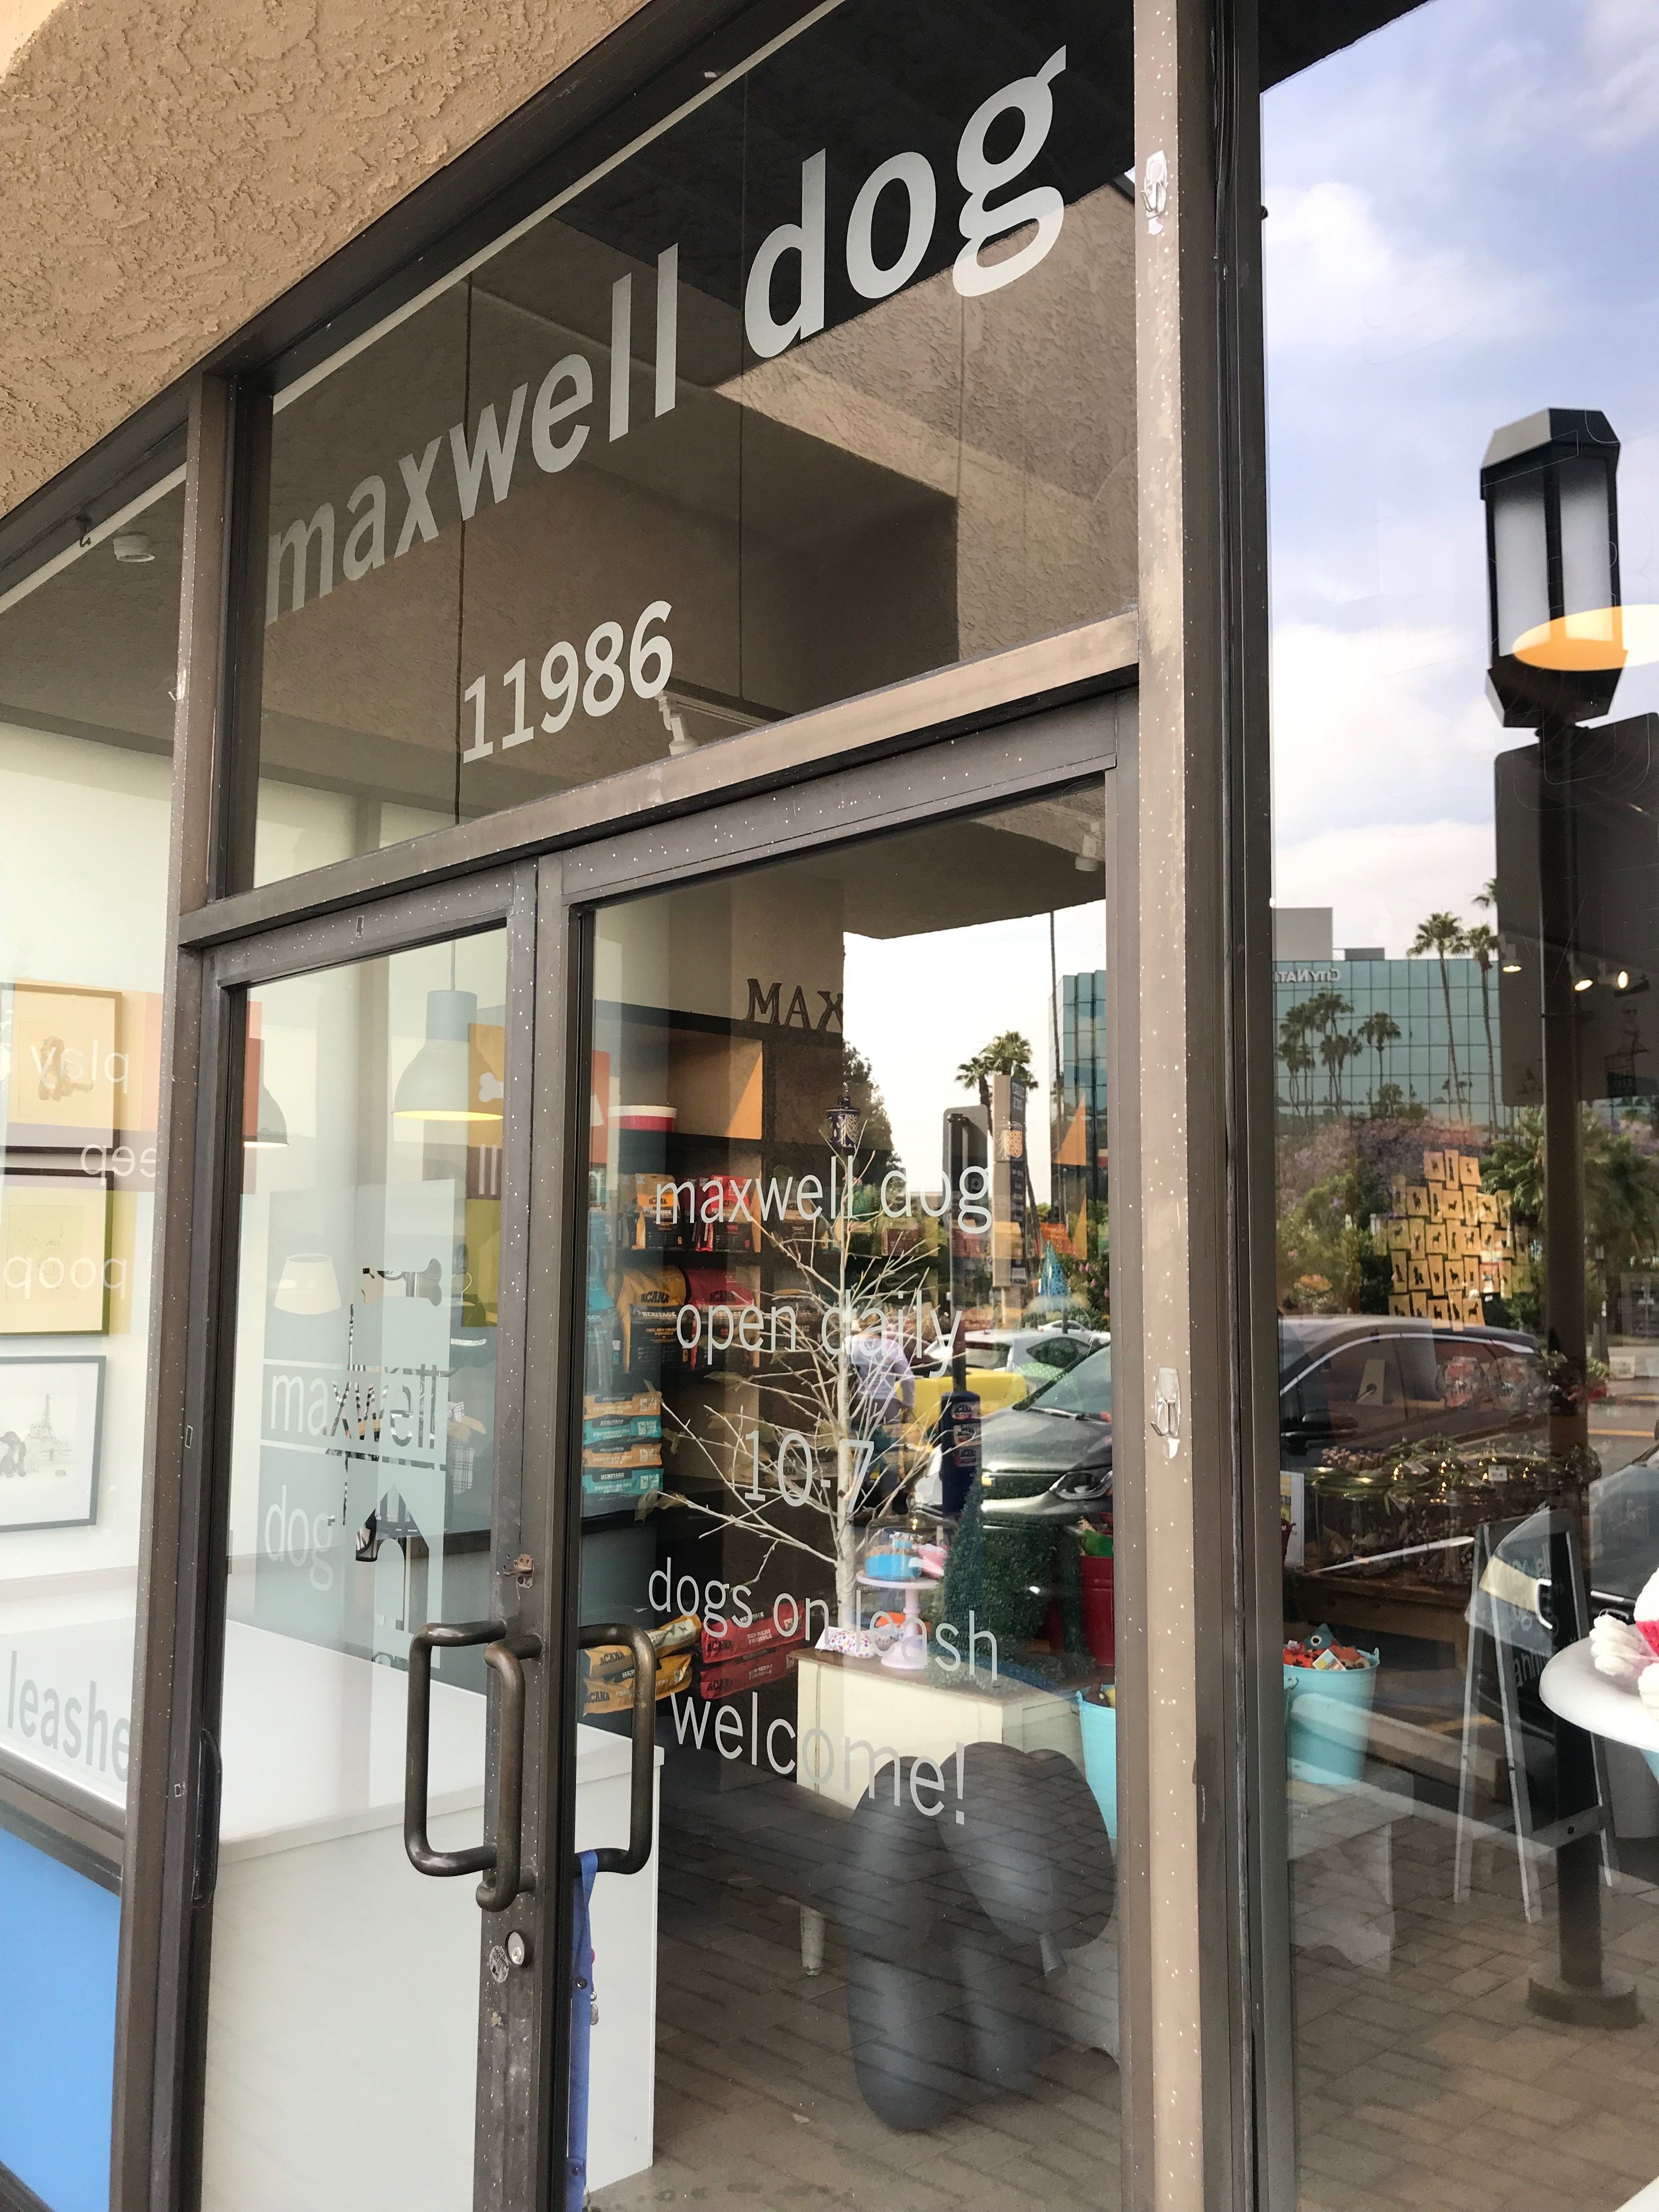 You are currently viewing Name and Address Sign for Maxwell Dog in Studio City